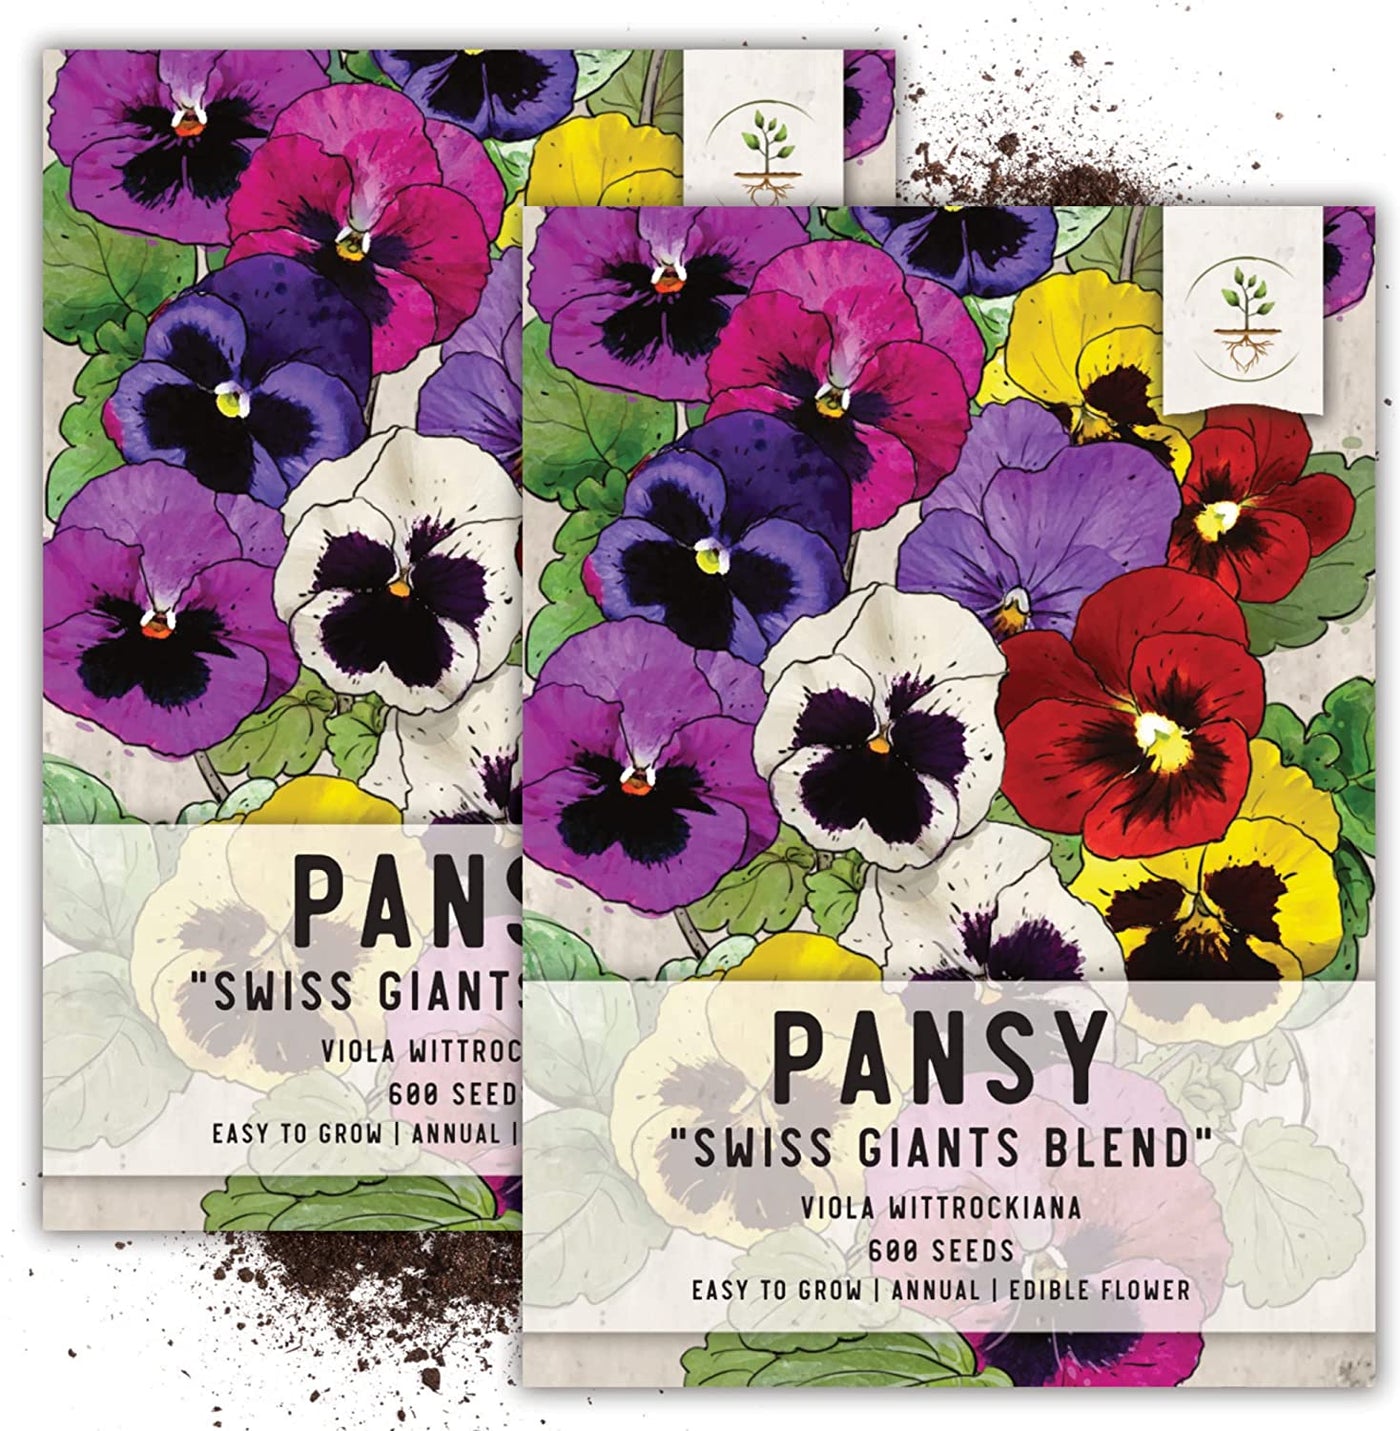 Swiss Giants Pansy Seeds for Planting (Viola wittrockiana) Single Package of 600 Seeds - Heirloom, Untreated, Attracts Monarch Butterflies